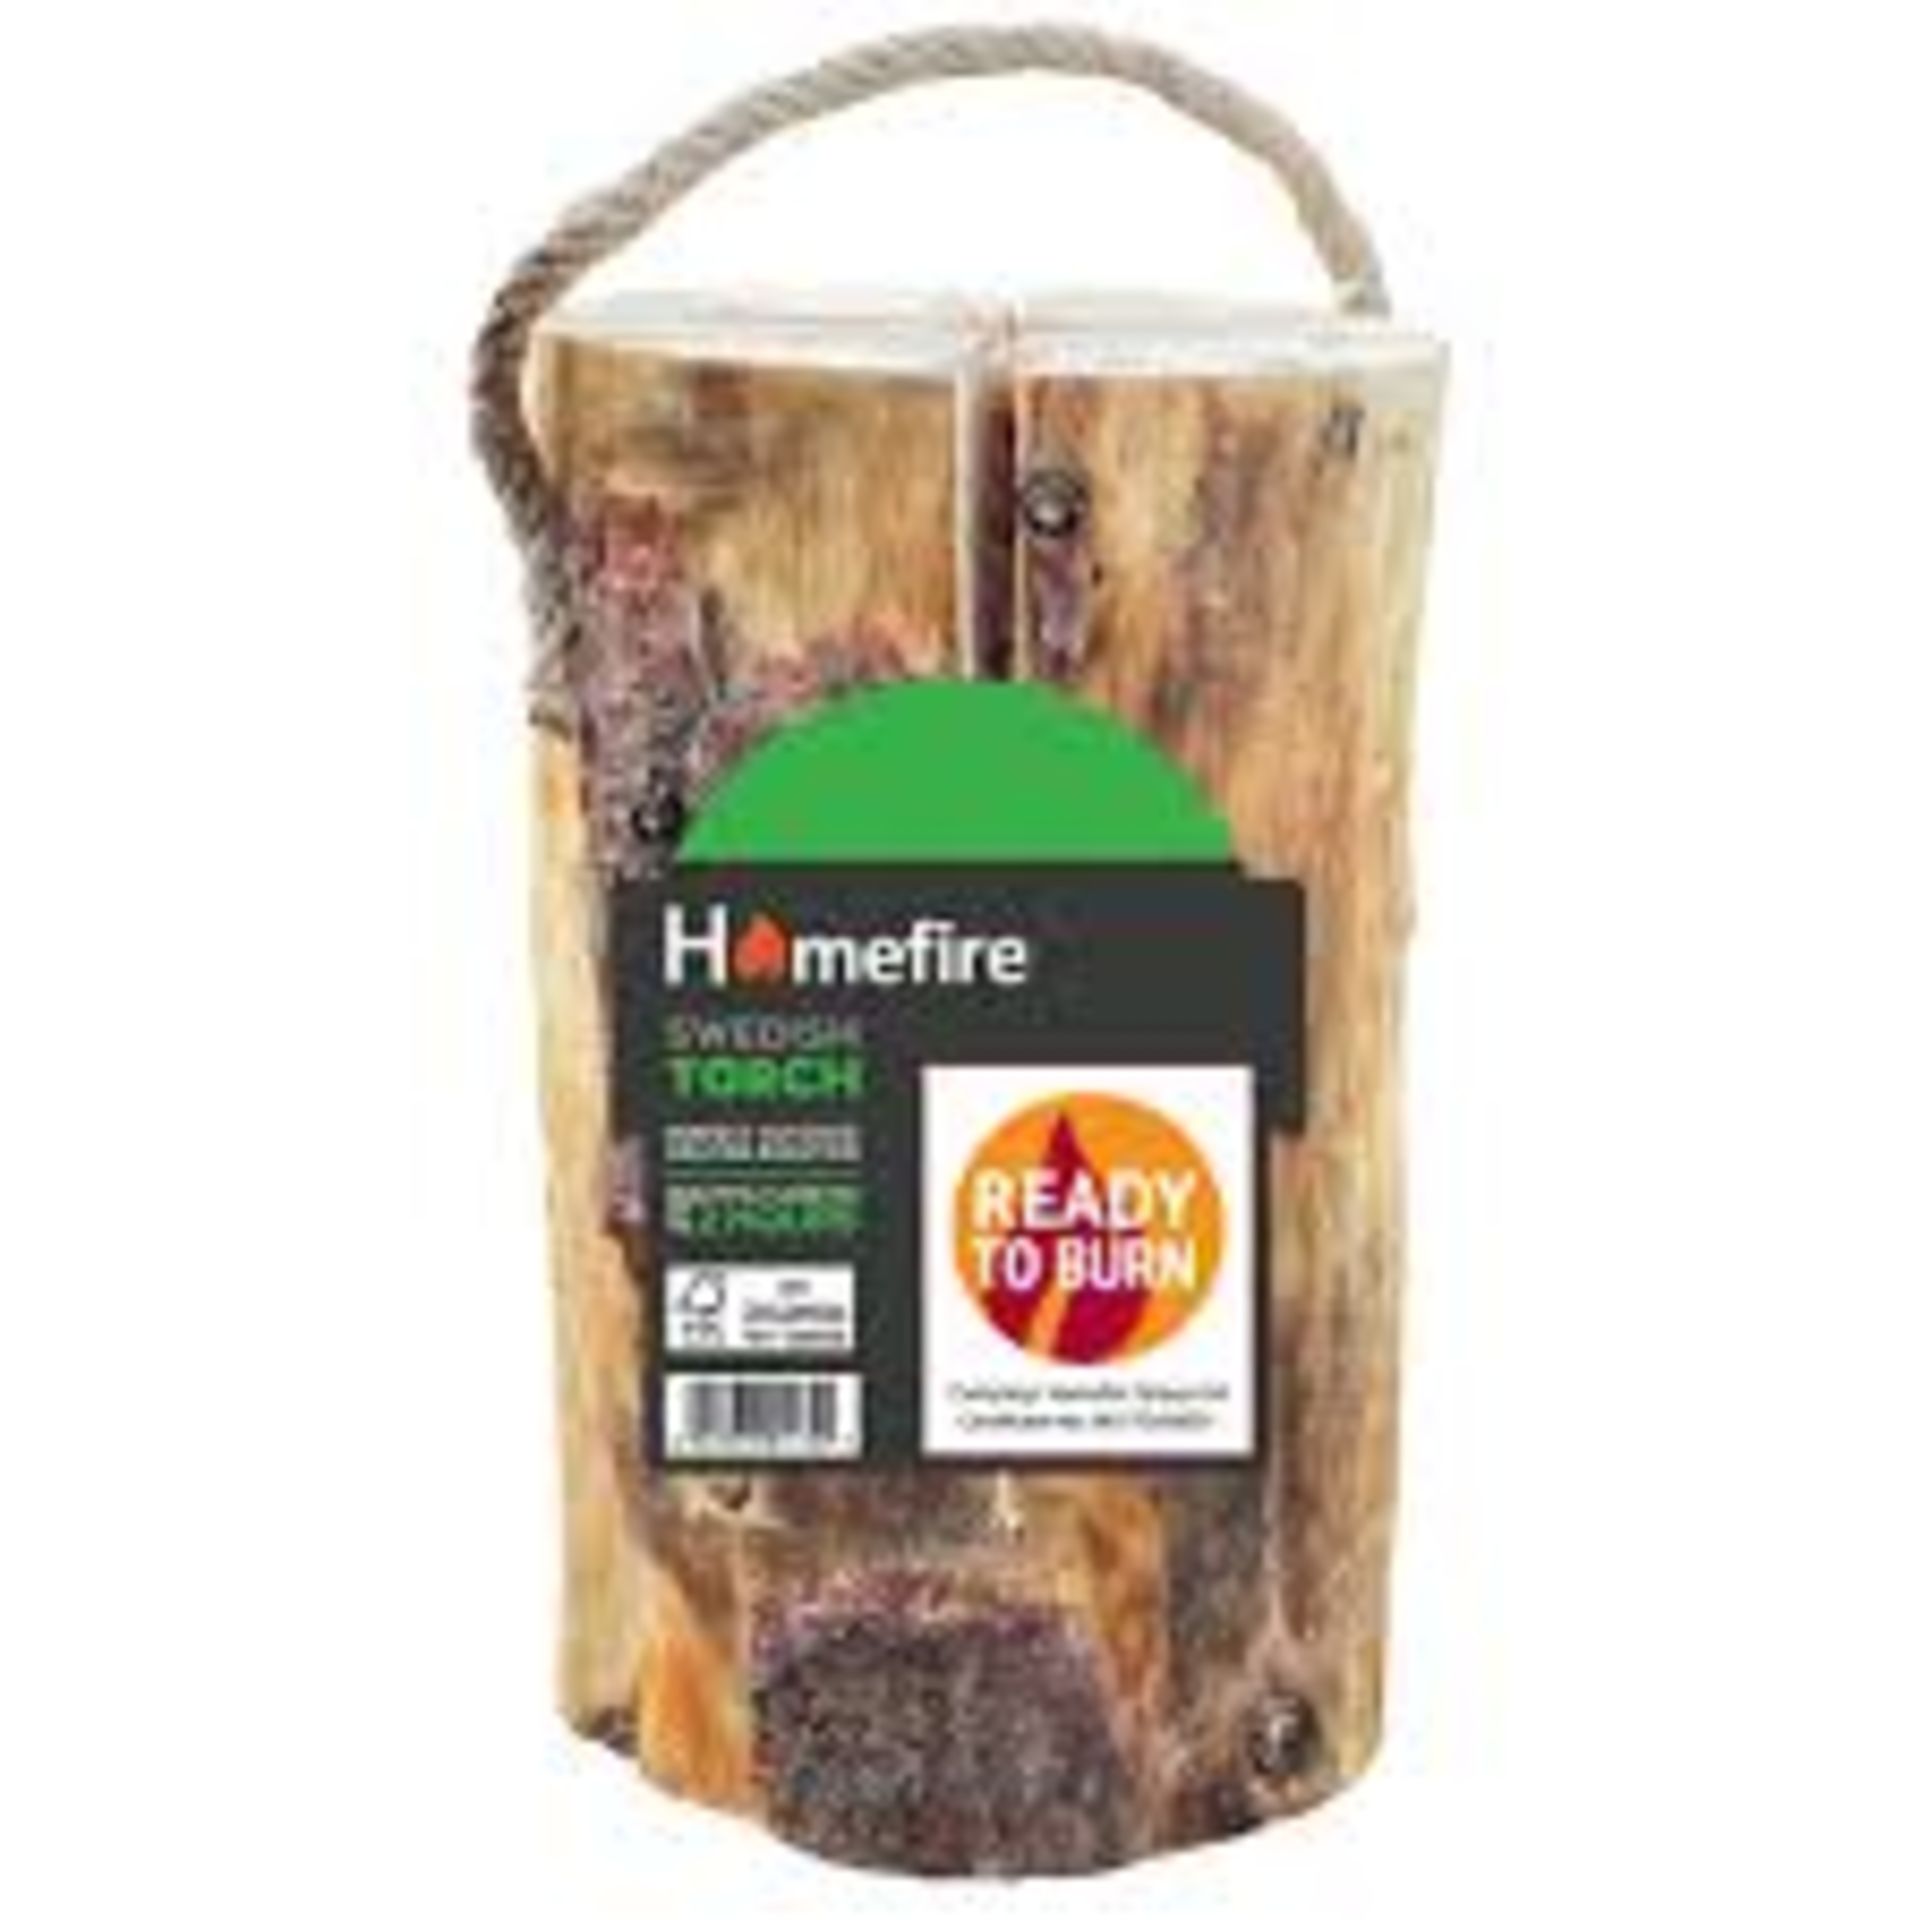 TRADE LOT 84 x New Homefire Swedish Torch Logs. Are you looking to take your campfire experience